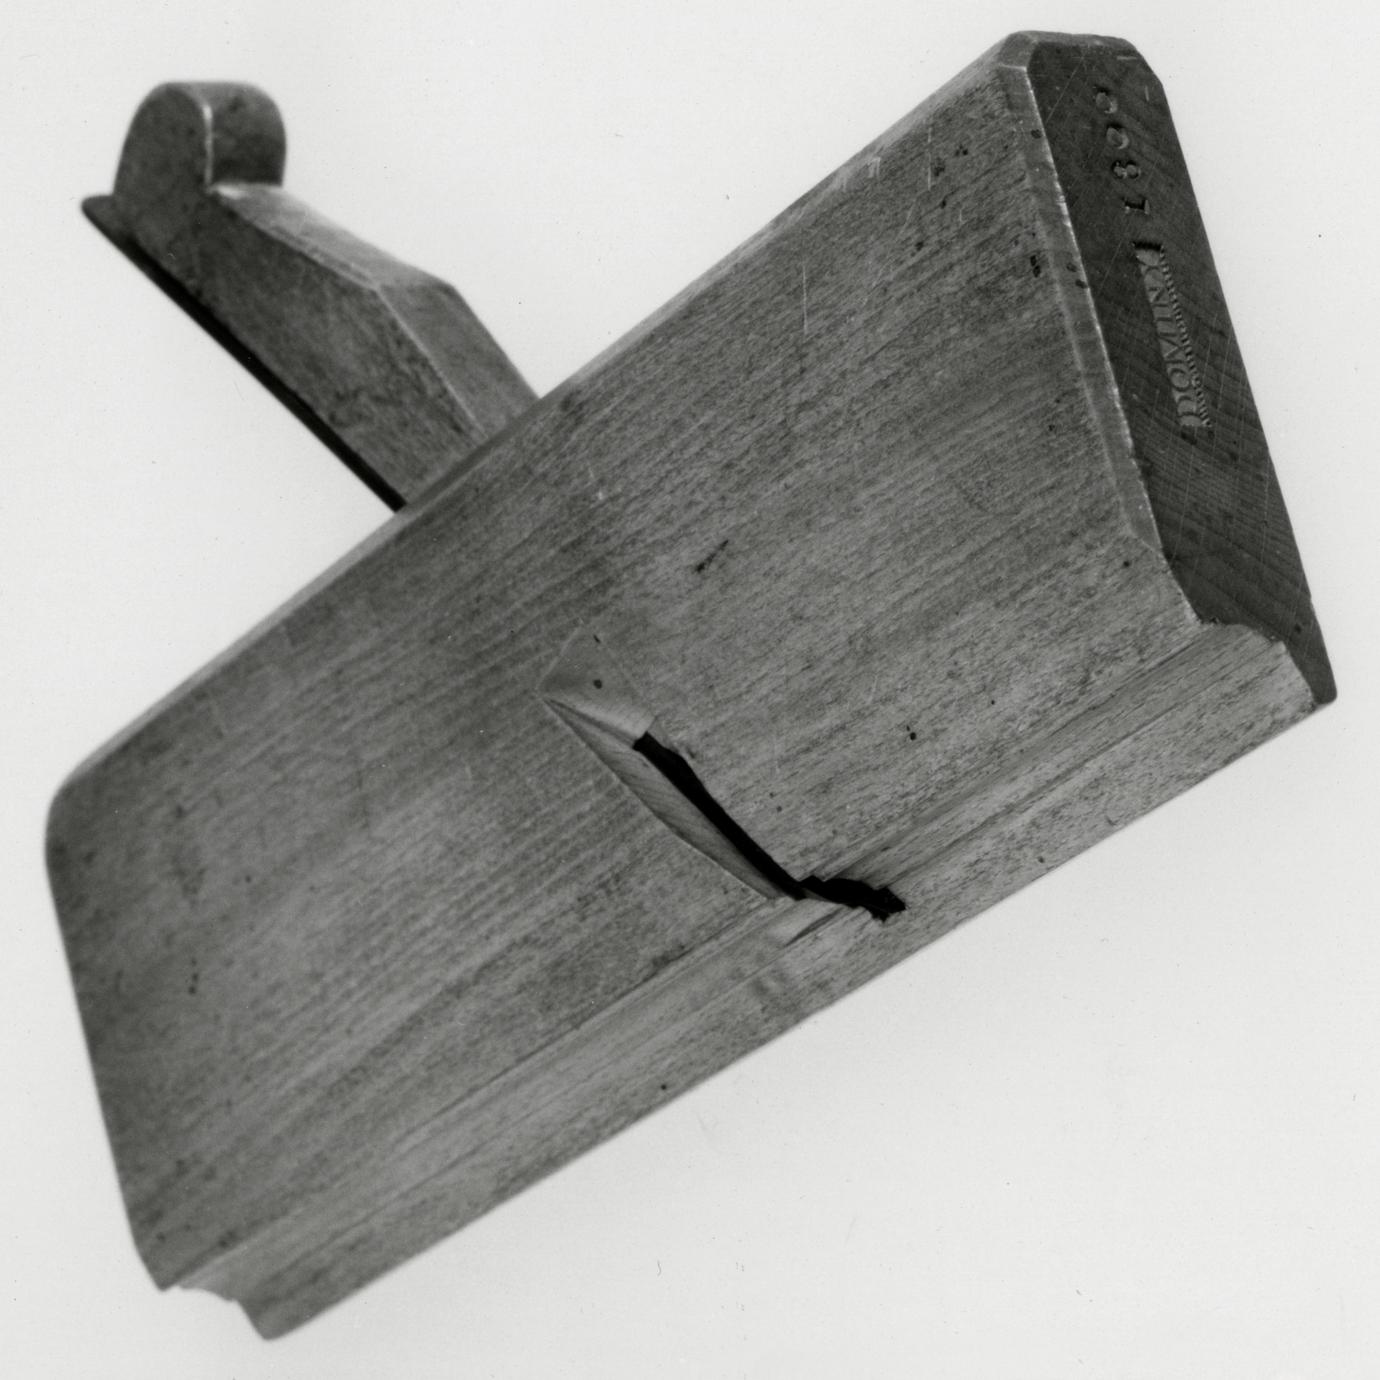 Black and white photograph of an ovolo or quarter-round plane.